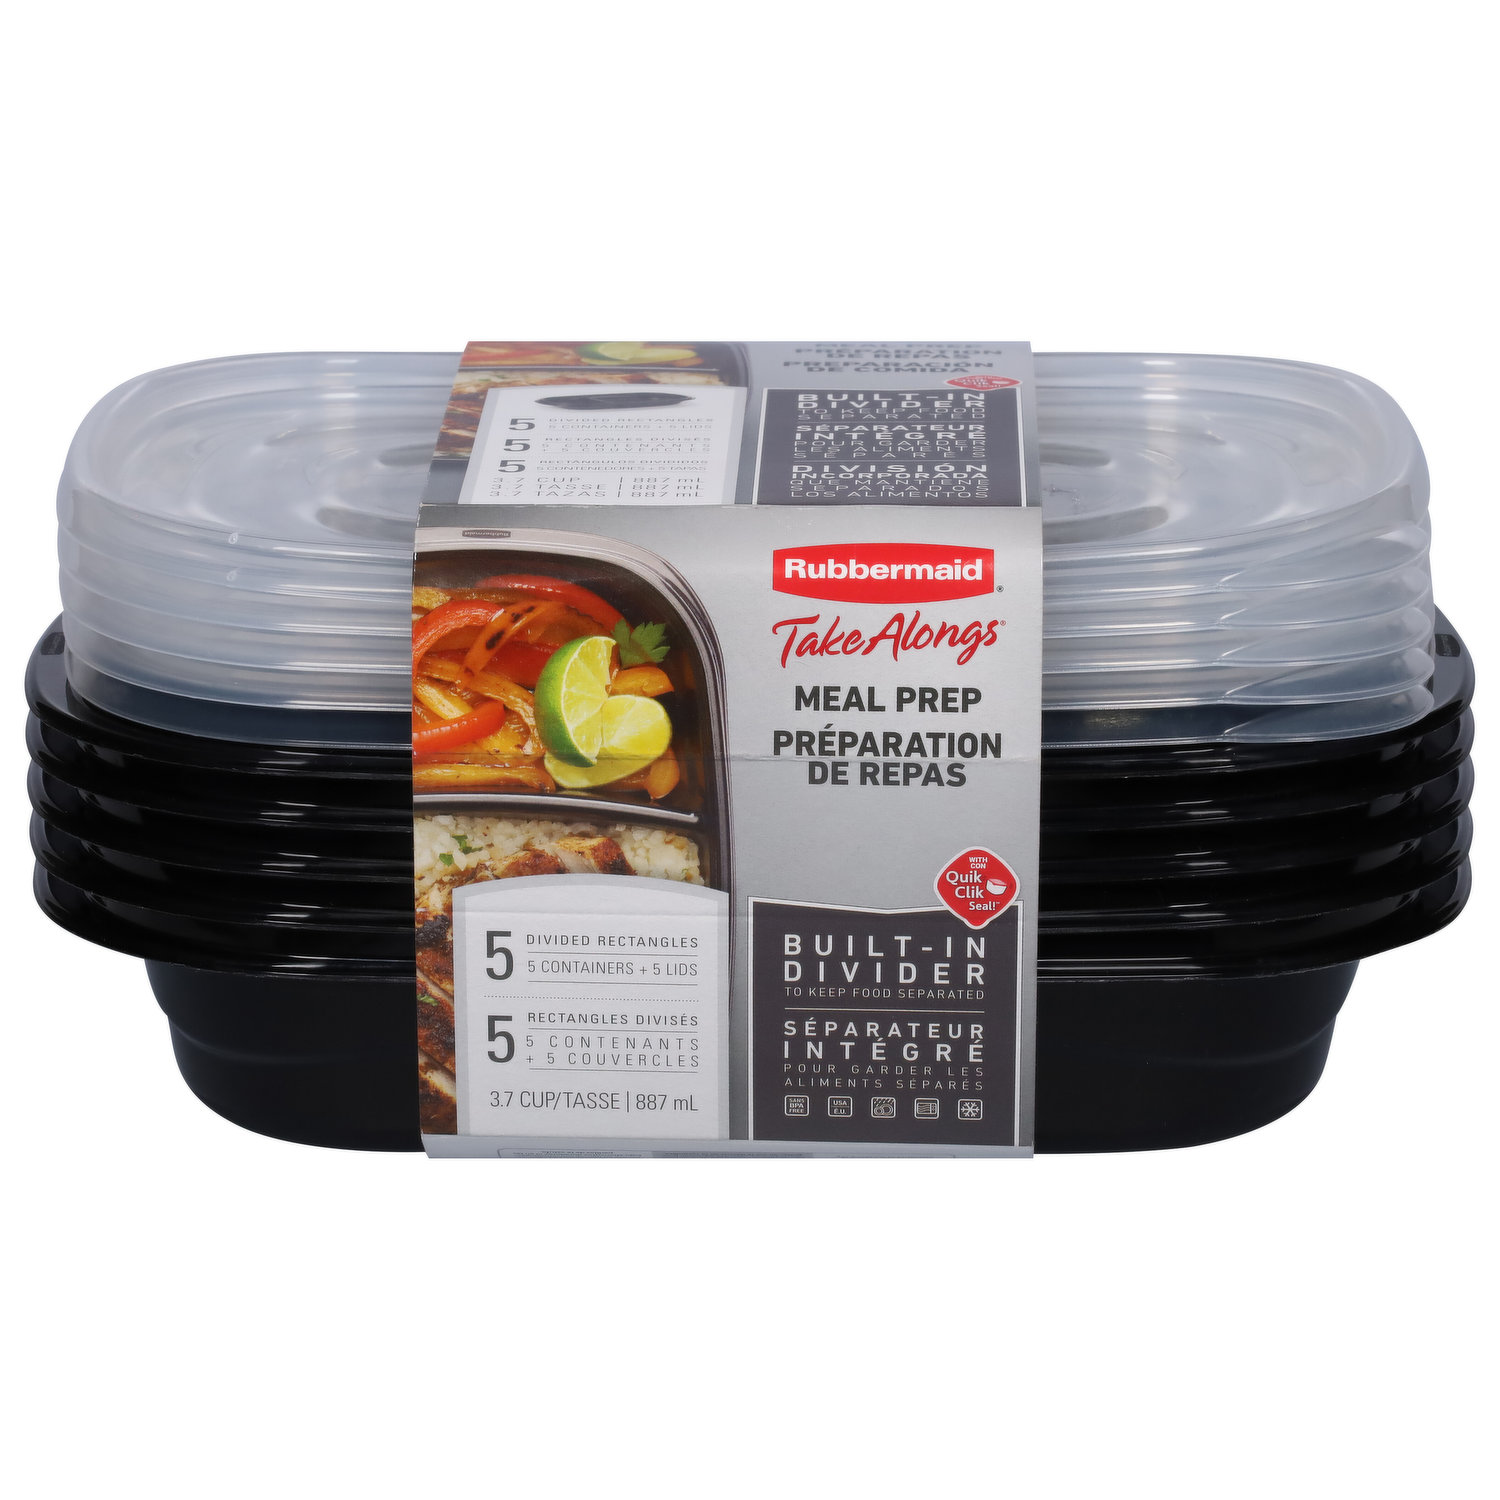 Rubbermaid Easy Find Lids Container + Lid, Divided, 5.3 Cups, Plastic  Containers